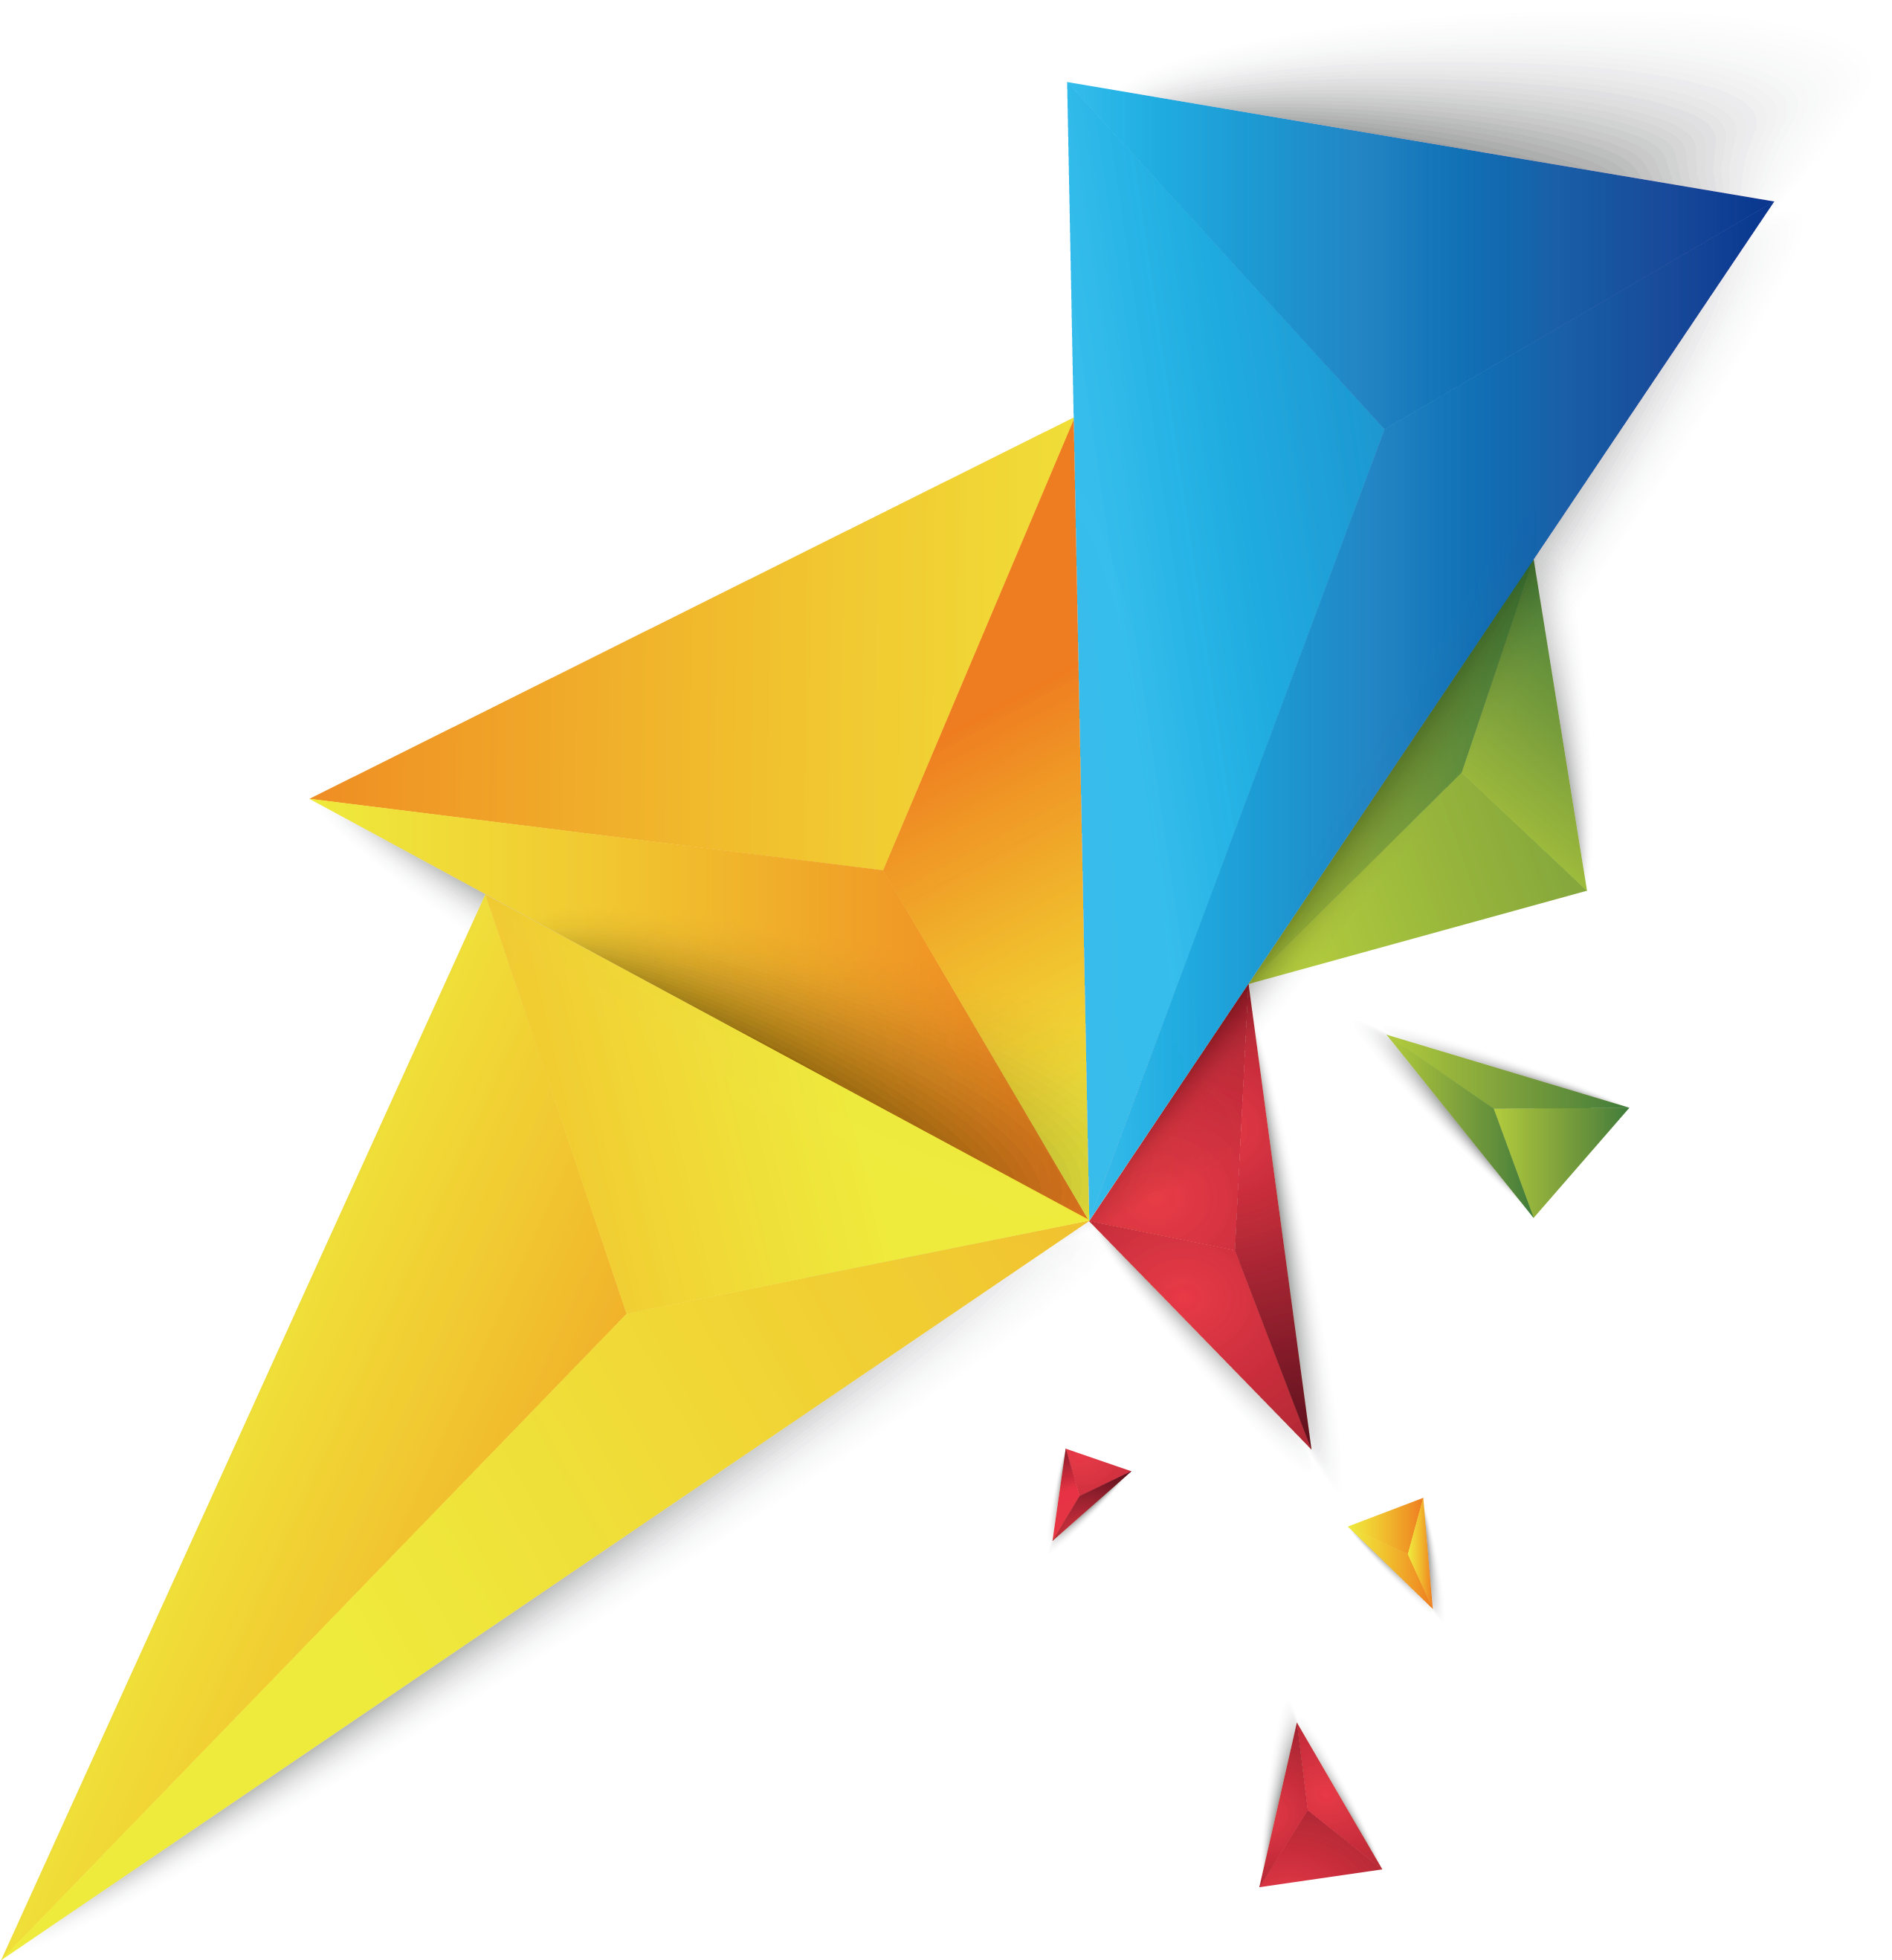 Color Triangle Geometry Shard - Tiangular Color Vector Png (2558x2644)